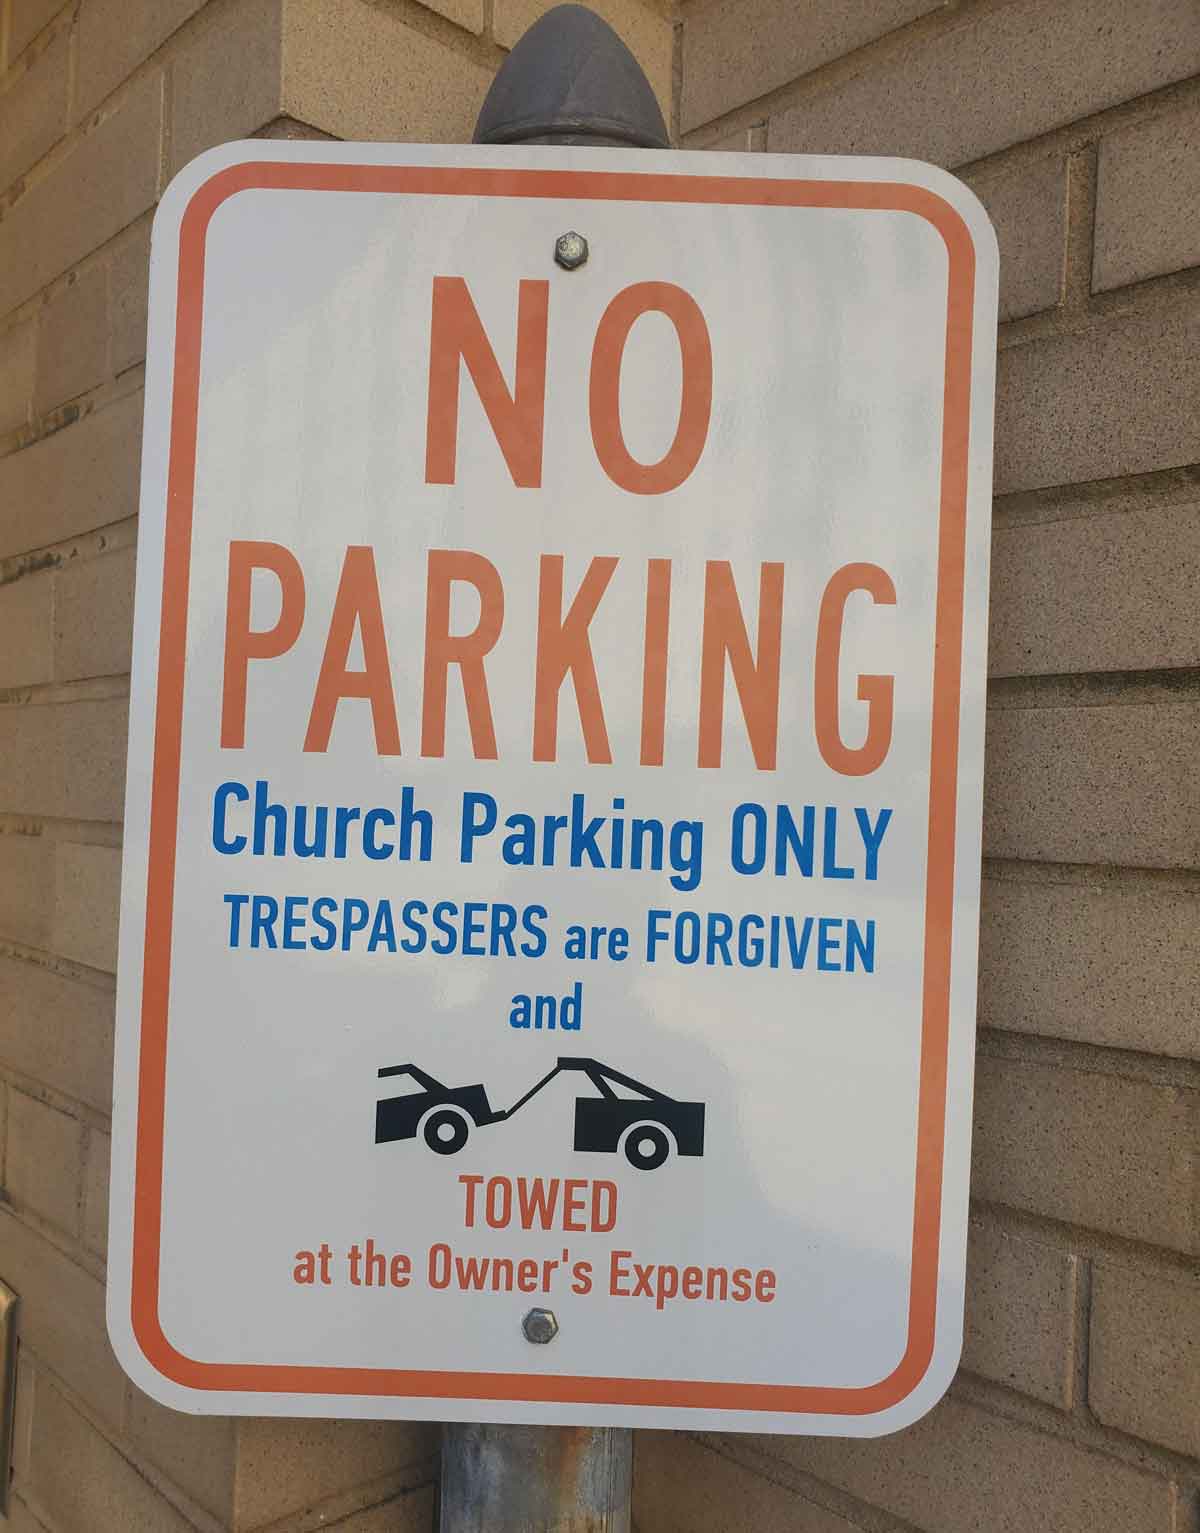 This sign in a church parking lot